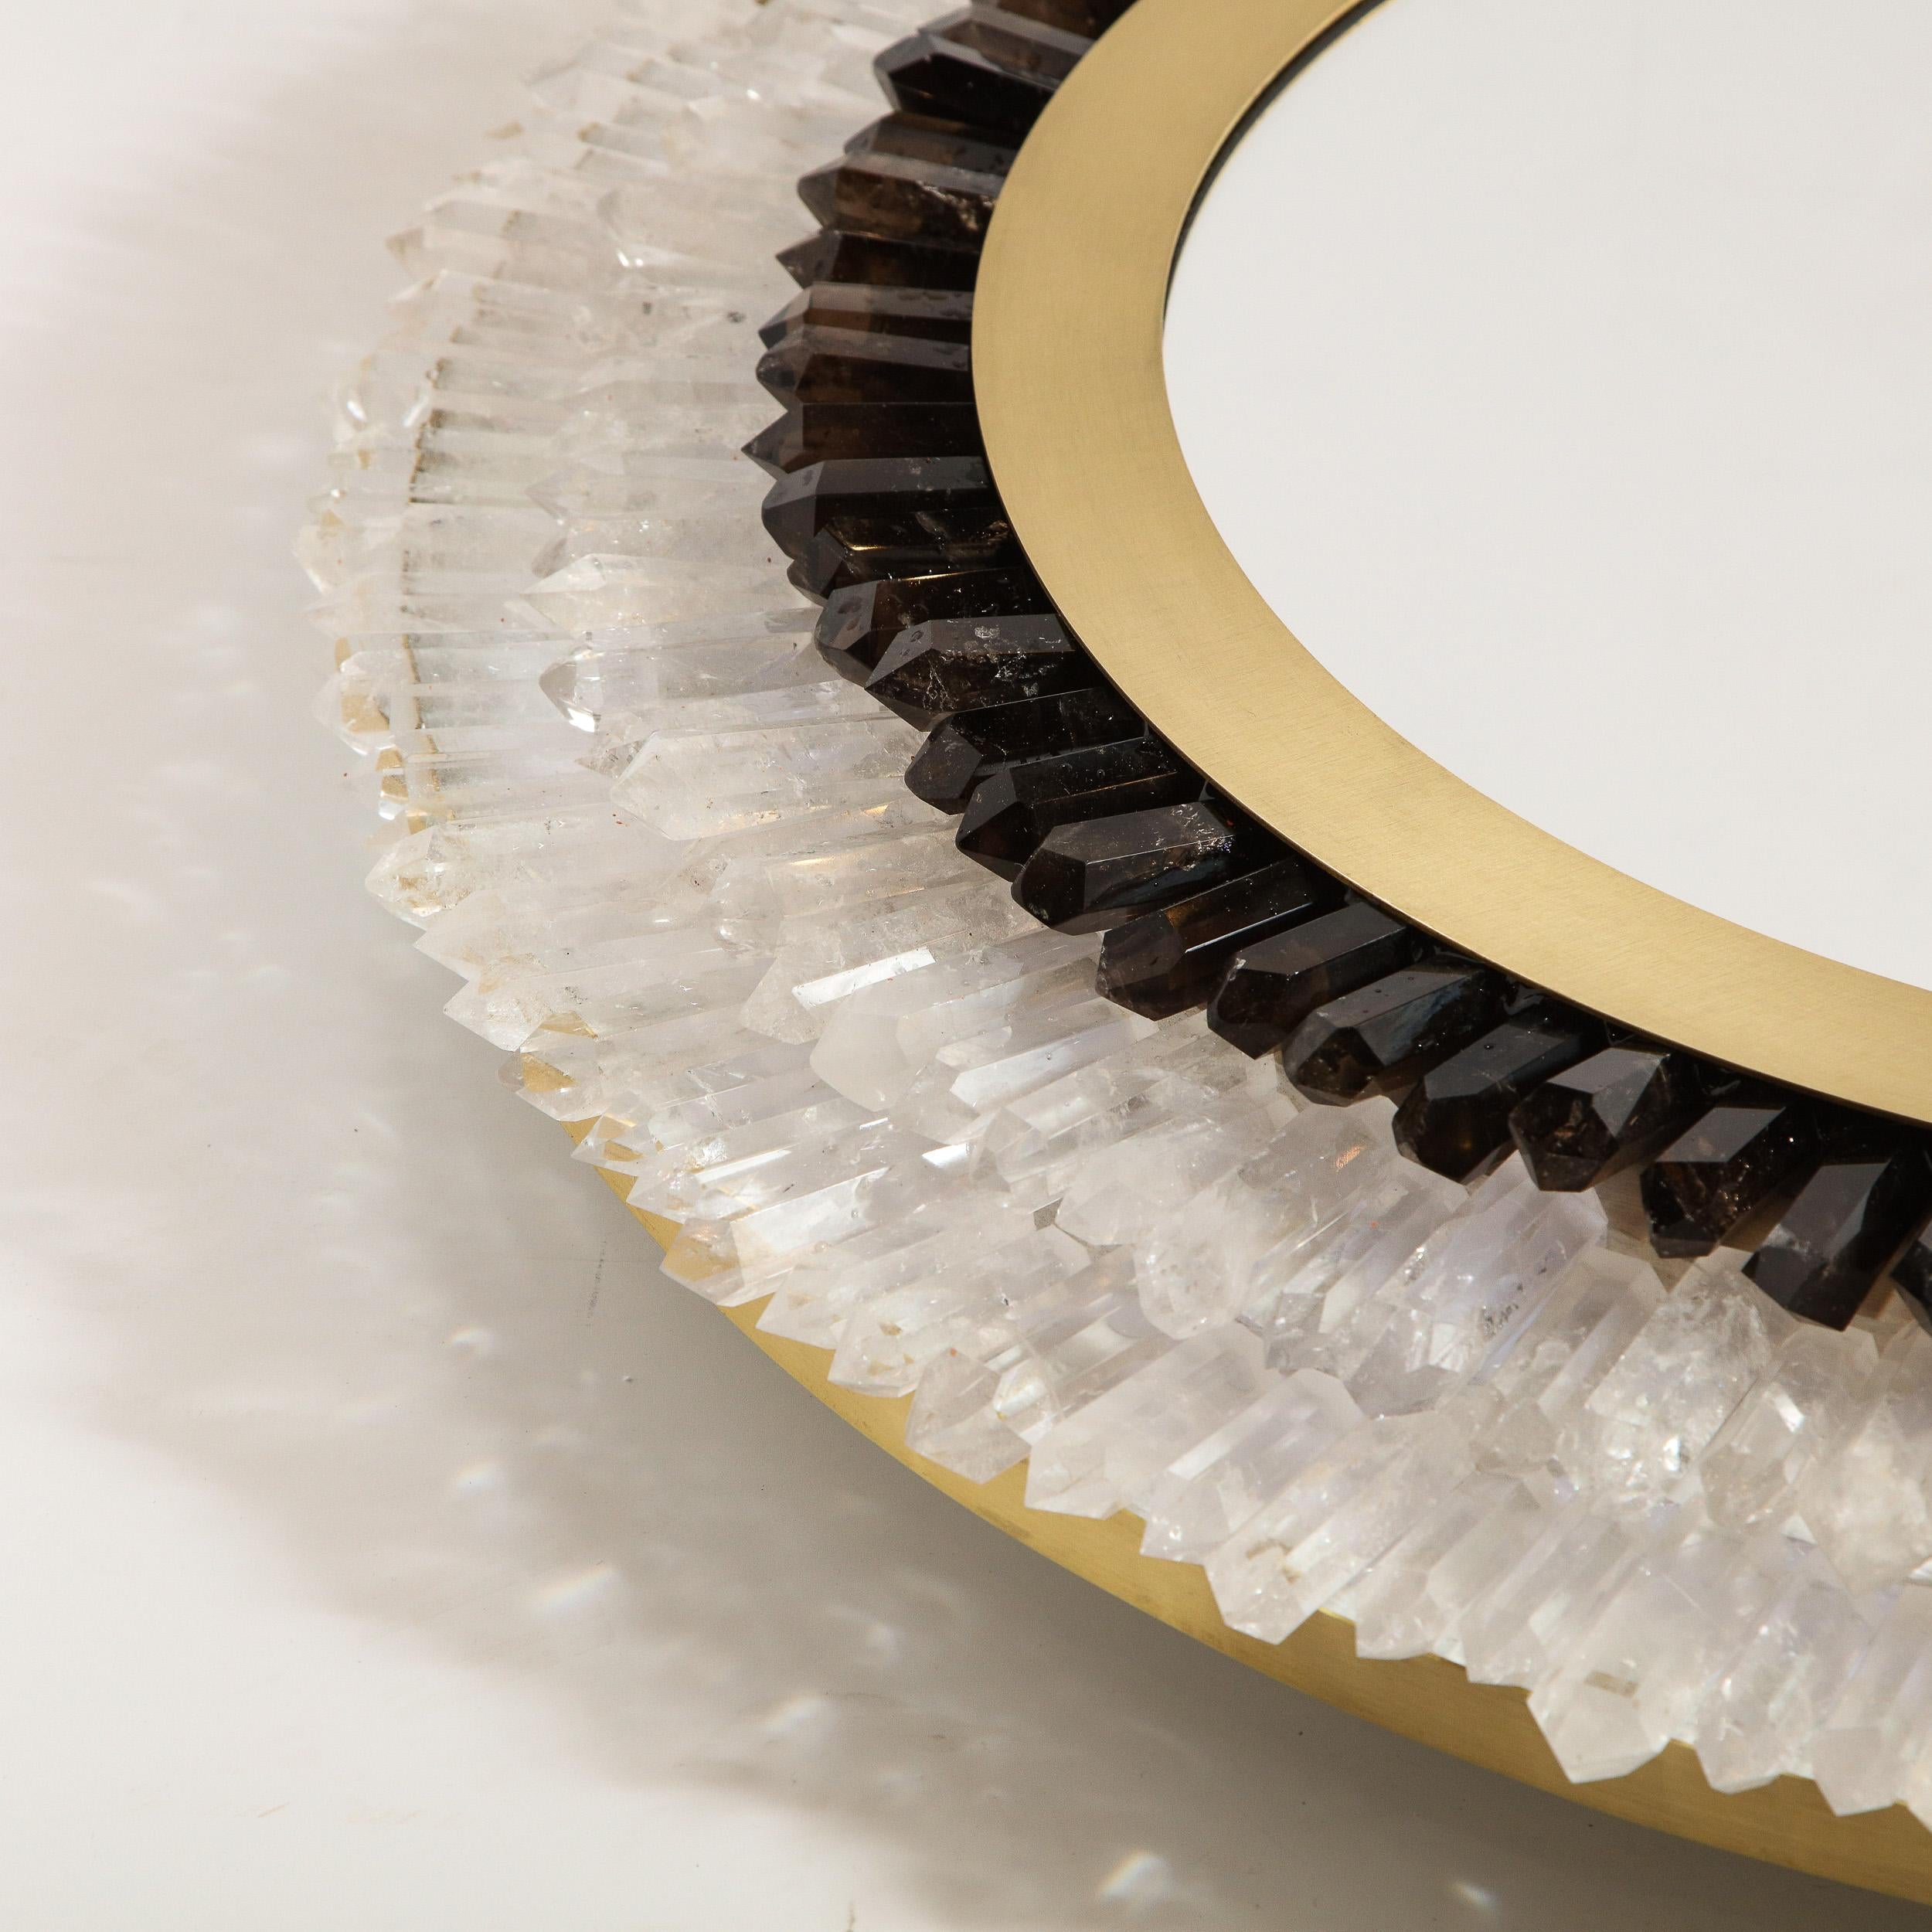 Contemporary Modernist Brushed Brass, White & Smoked Rock Crystal Circular Wall Mirror For Sale